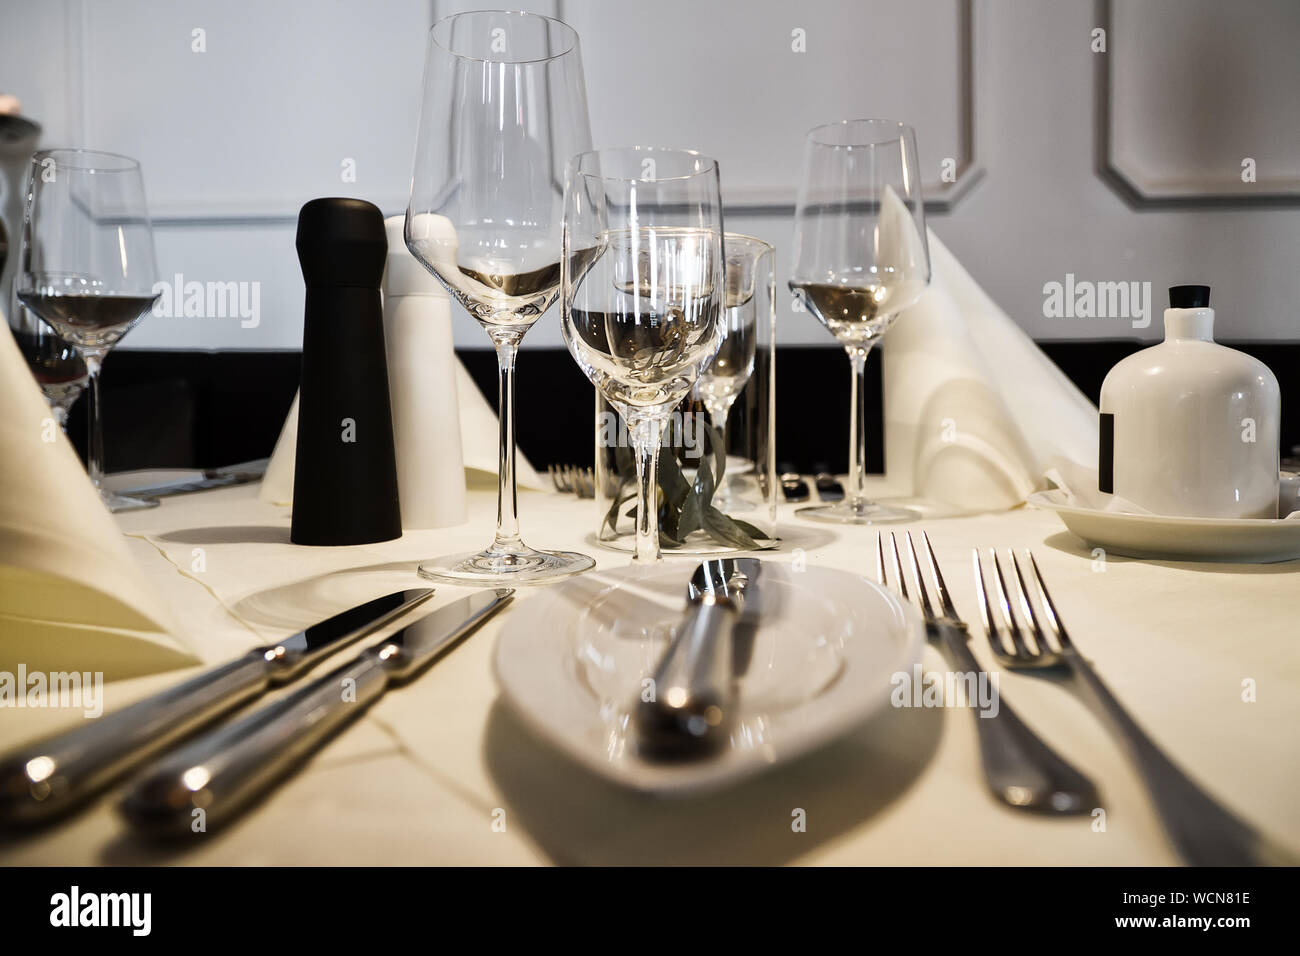 Close-up Of Place Setting On Table Stock Photo